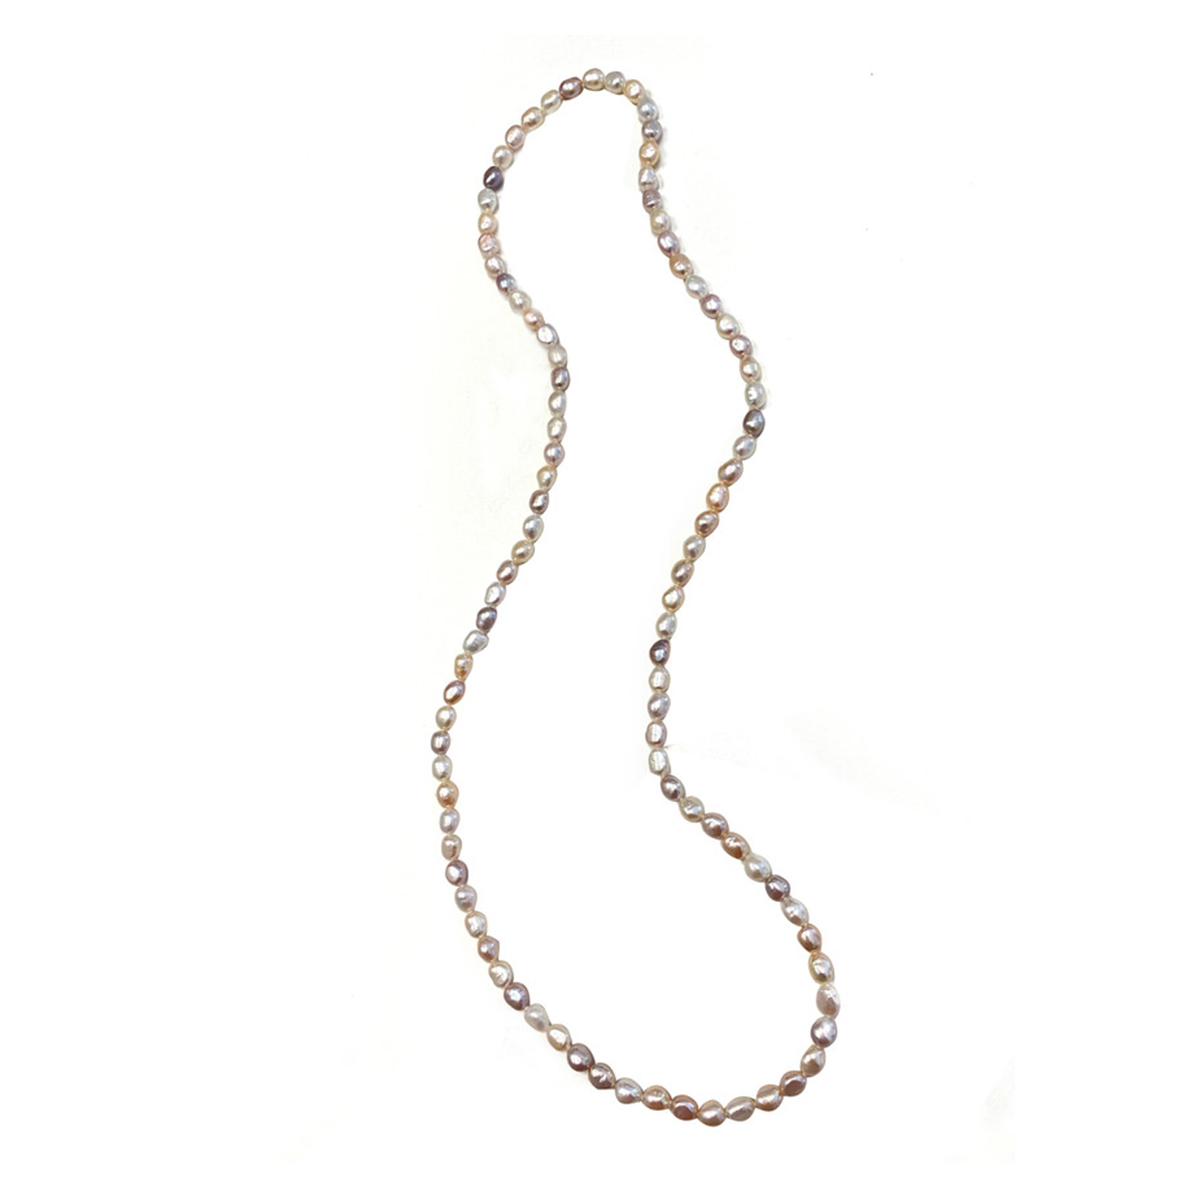 Endless Freshwater Pearl Necklace